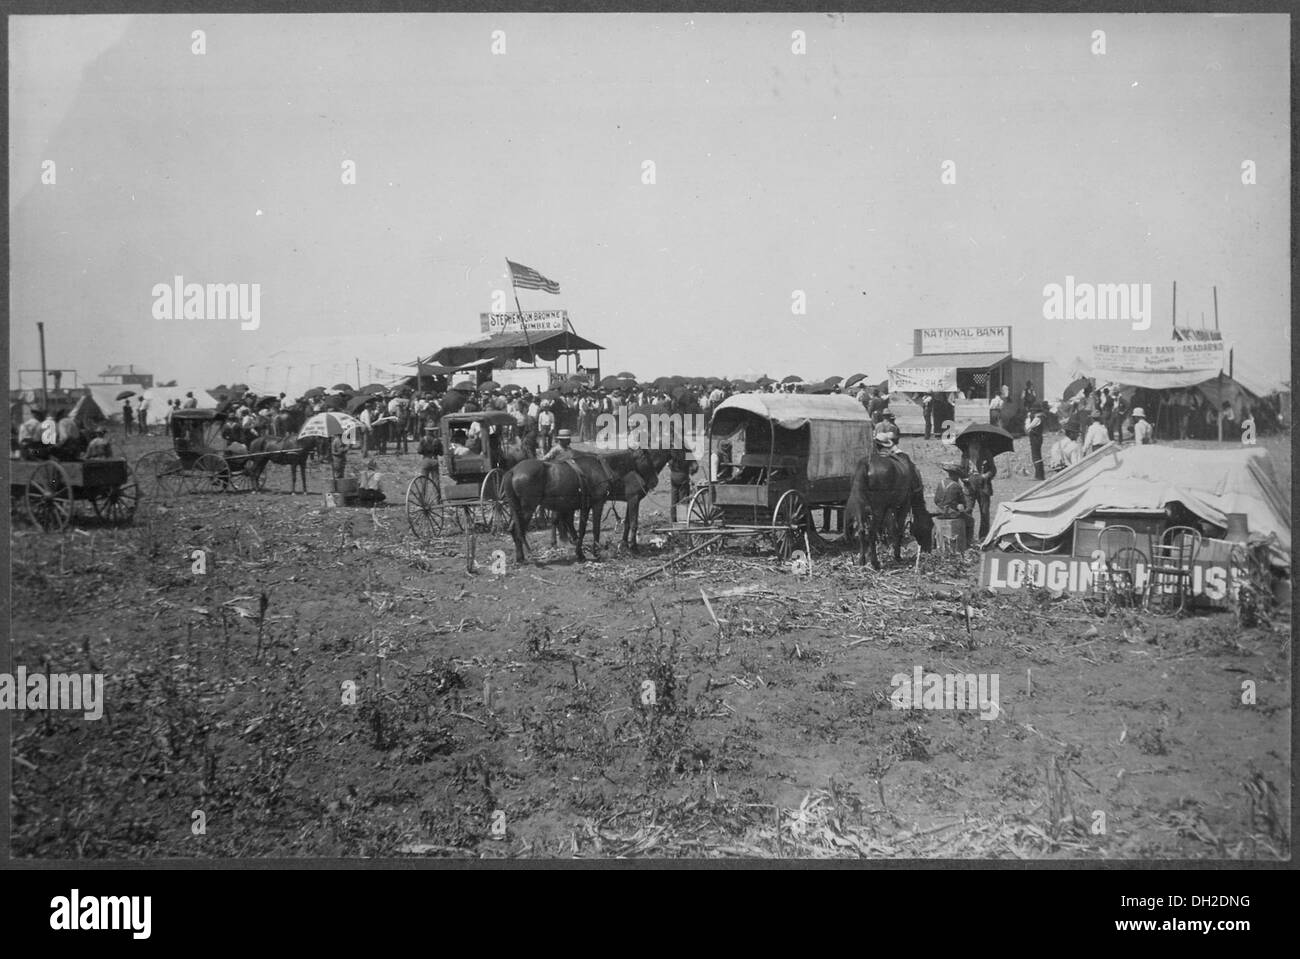 Anadarko Townsite, August 8, 1901. Auction in progress in lumber company booth. Temporary bank buildings and the beginni 516444 Stock Photo